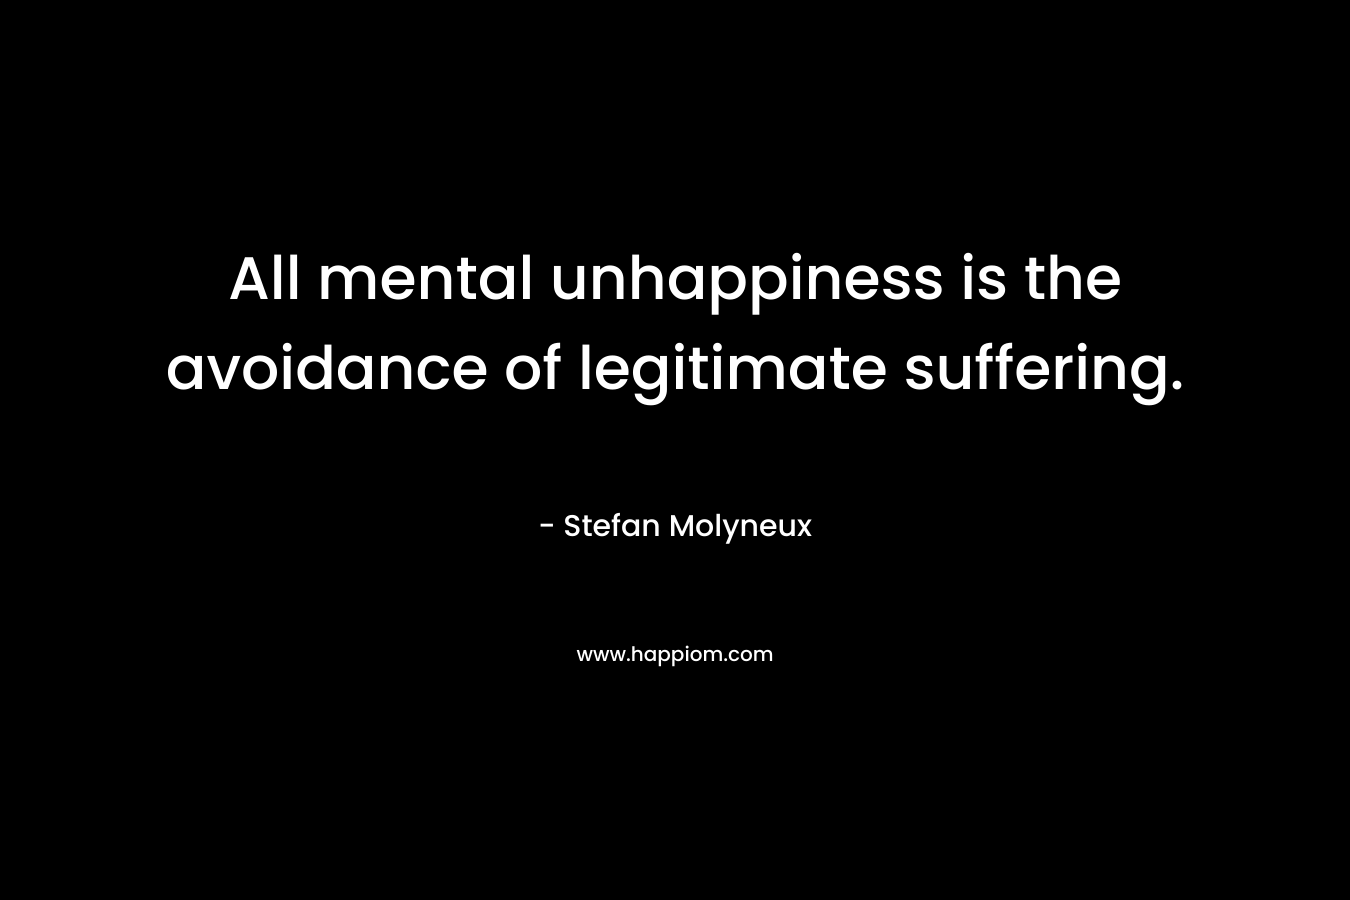 All mental unhappiness is the avoidance of legitimate suffering.